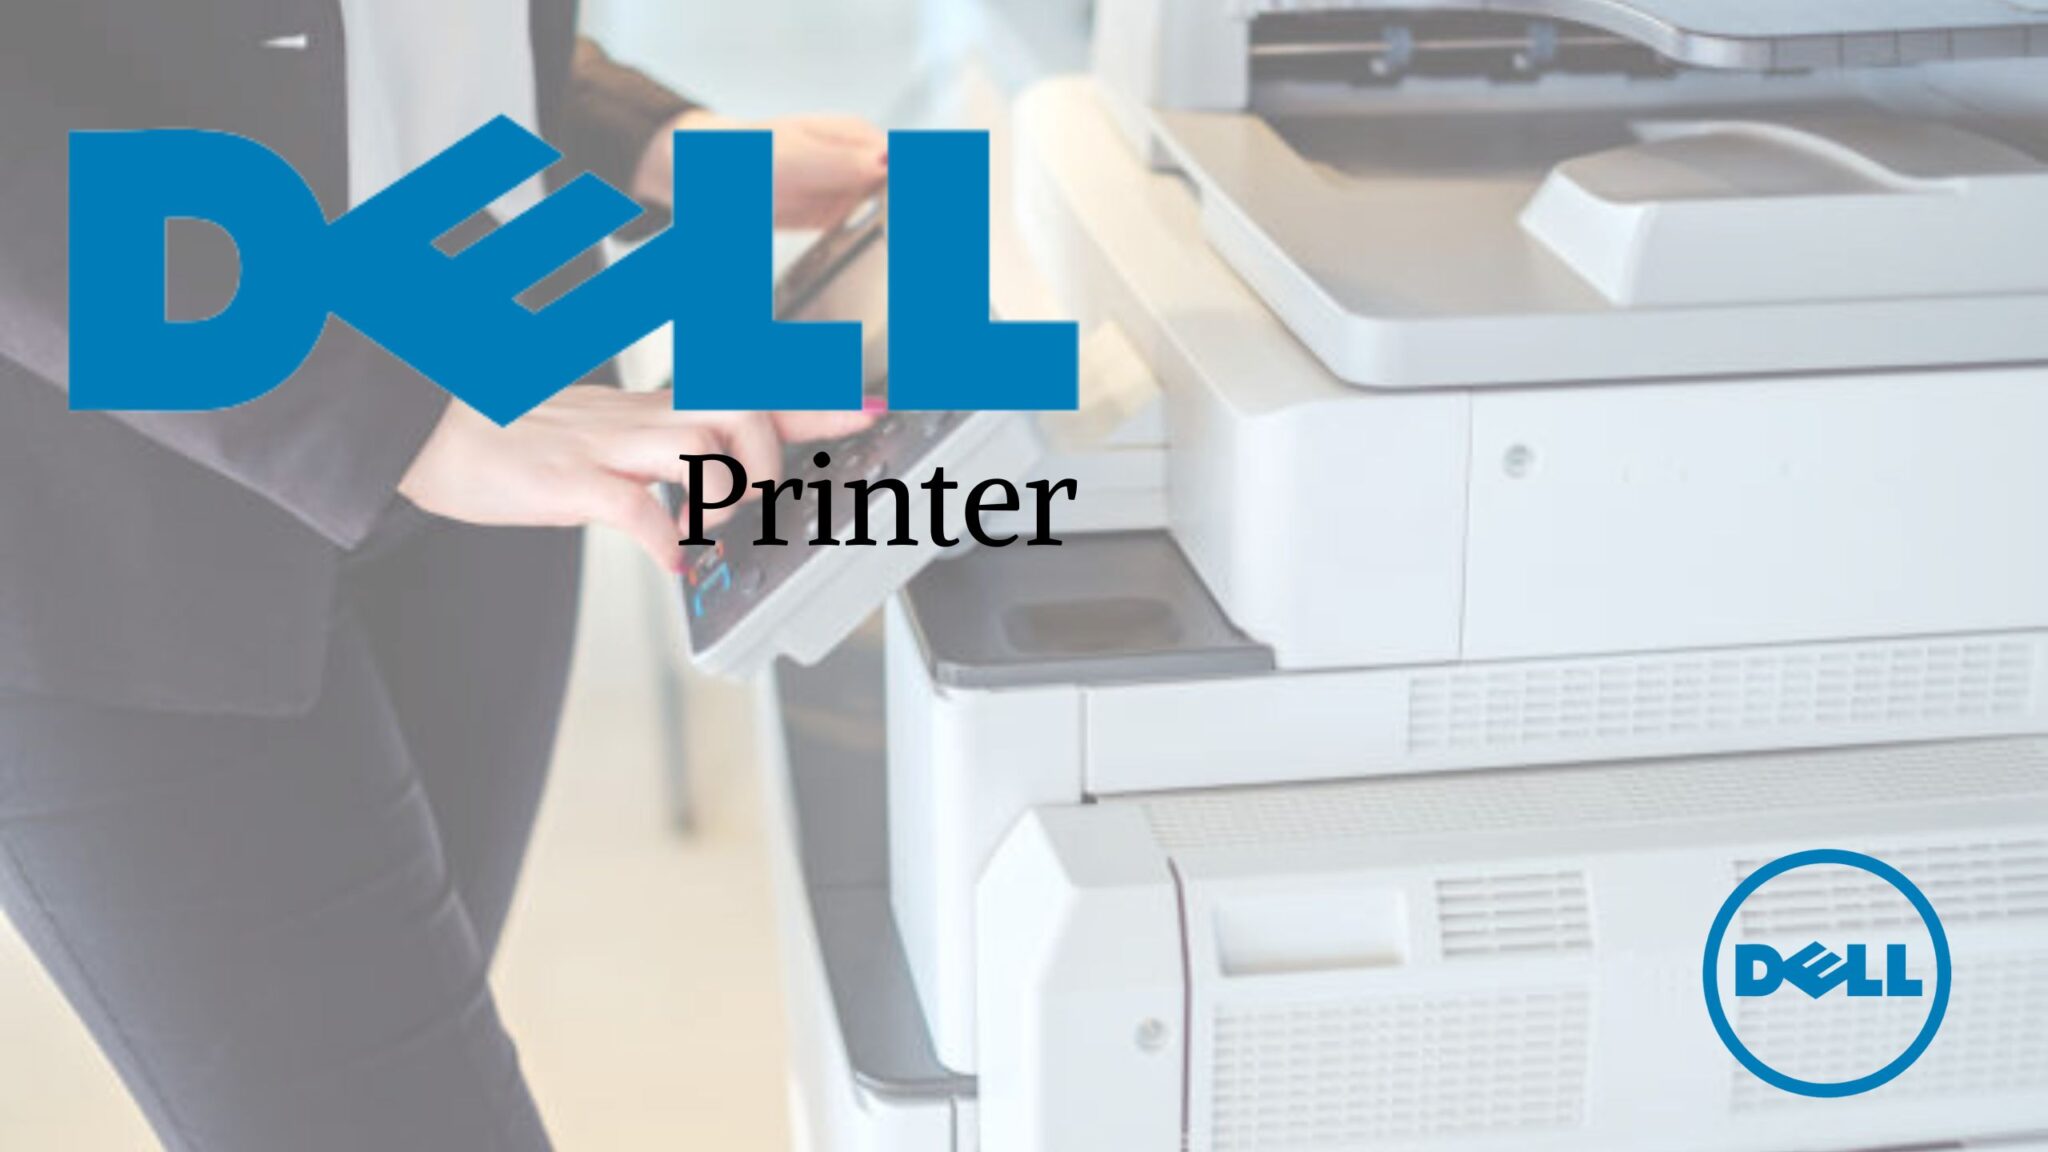 Want to know the latest Dell Printer models?